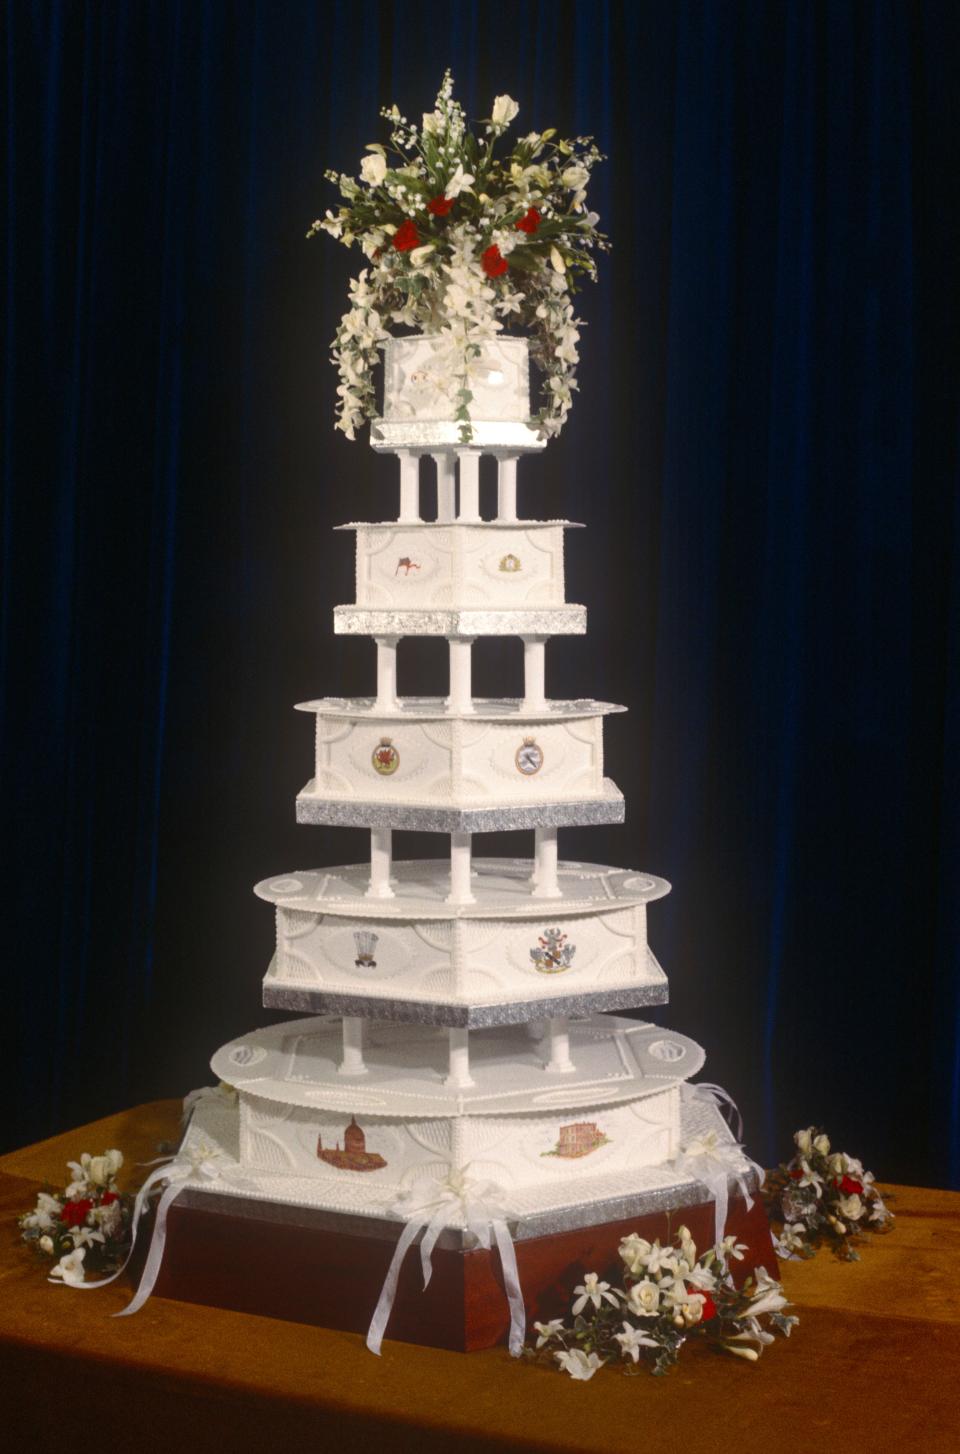 The wedding cake on display at Charles & Diana Royal Wedding, 29th July 1981 (Getty Images)